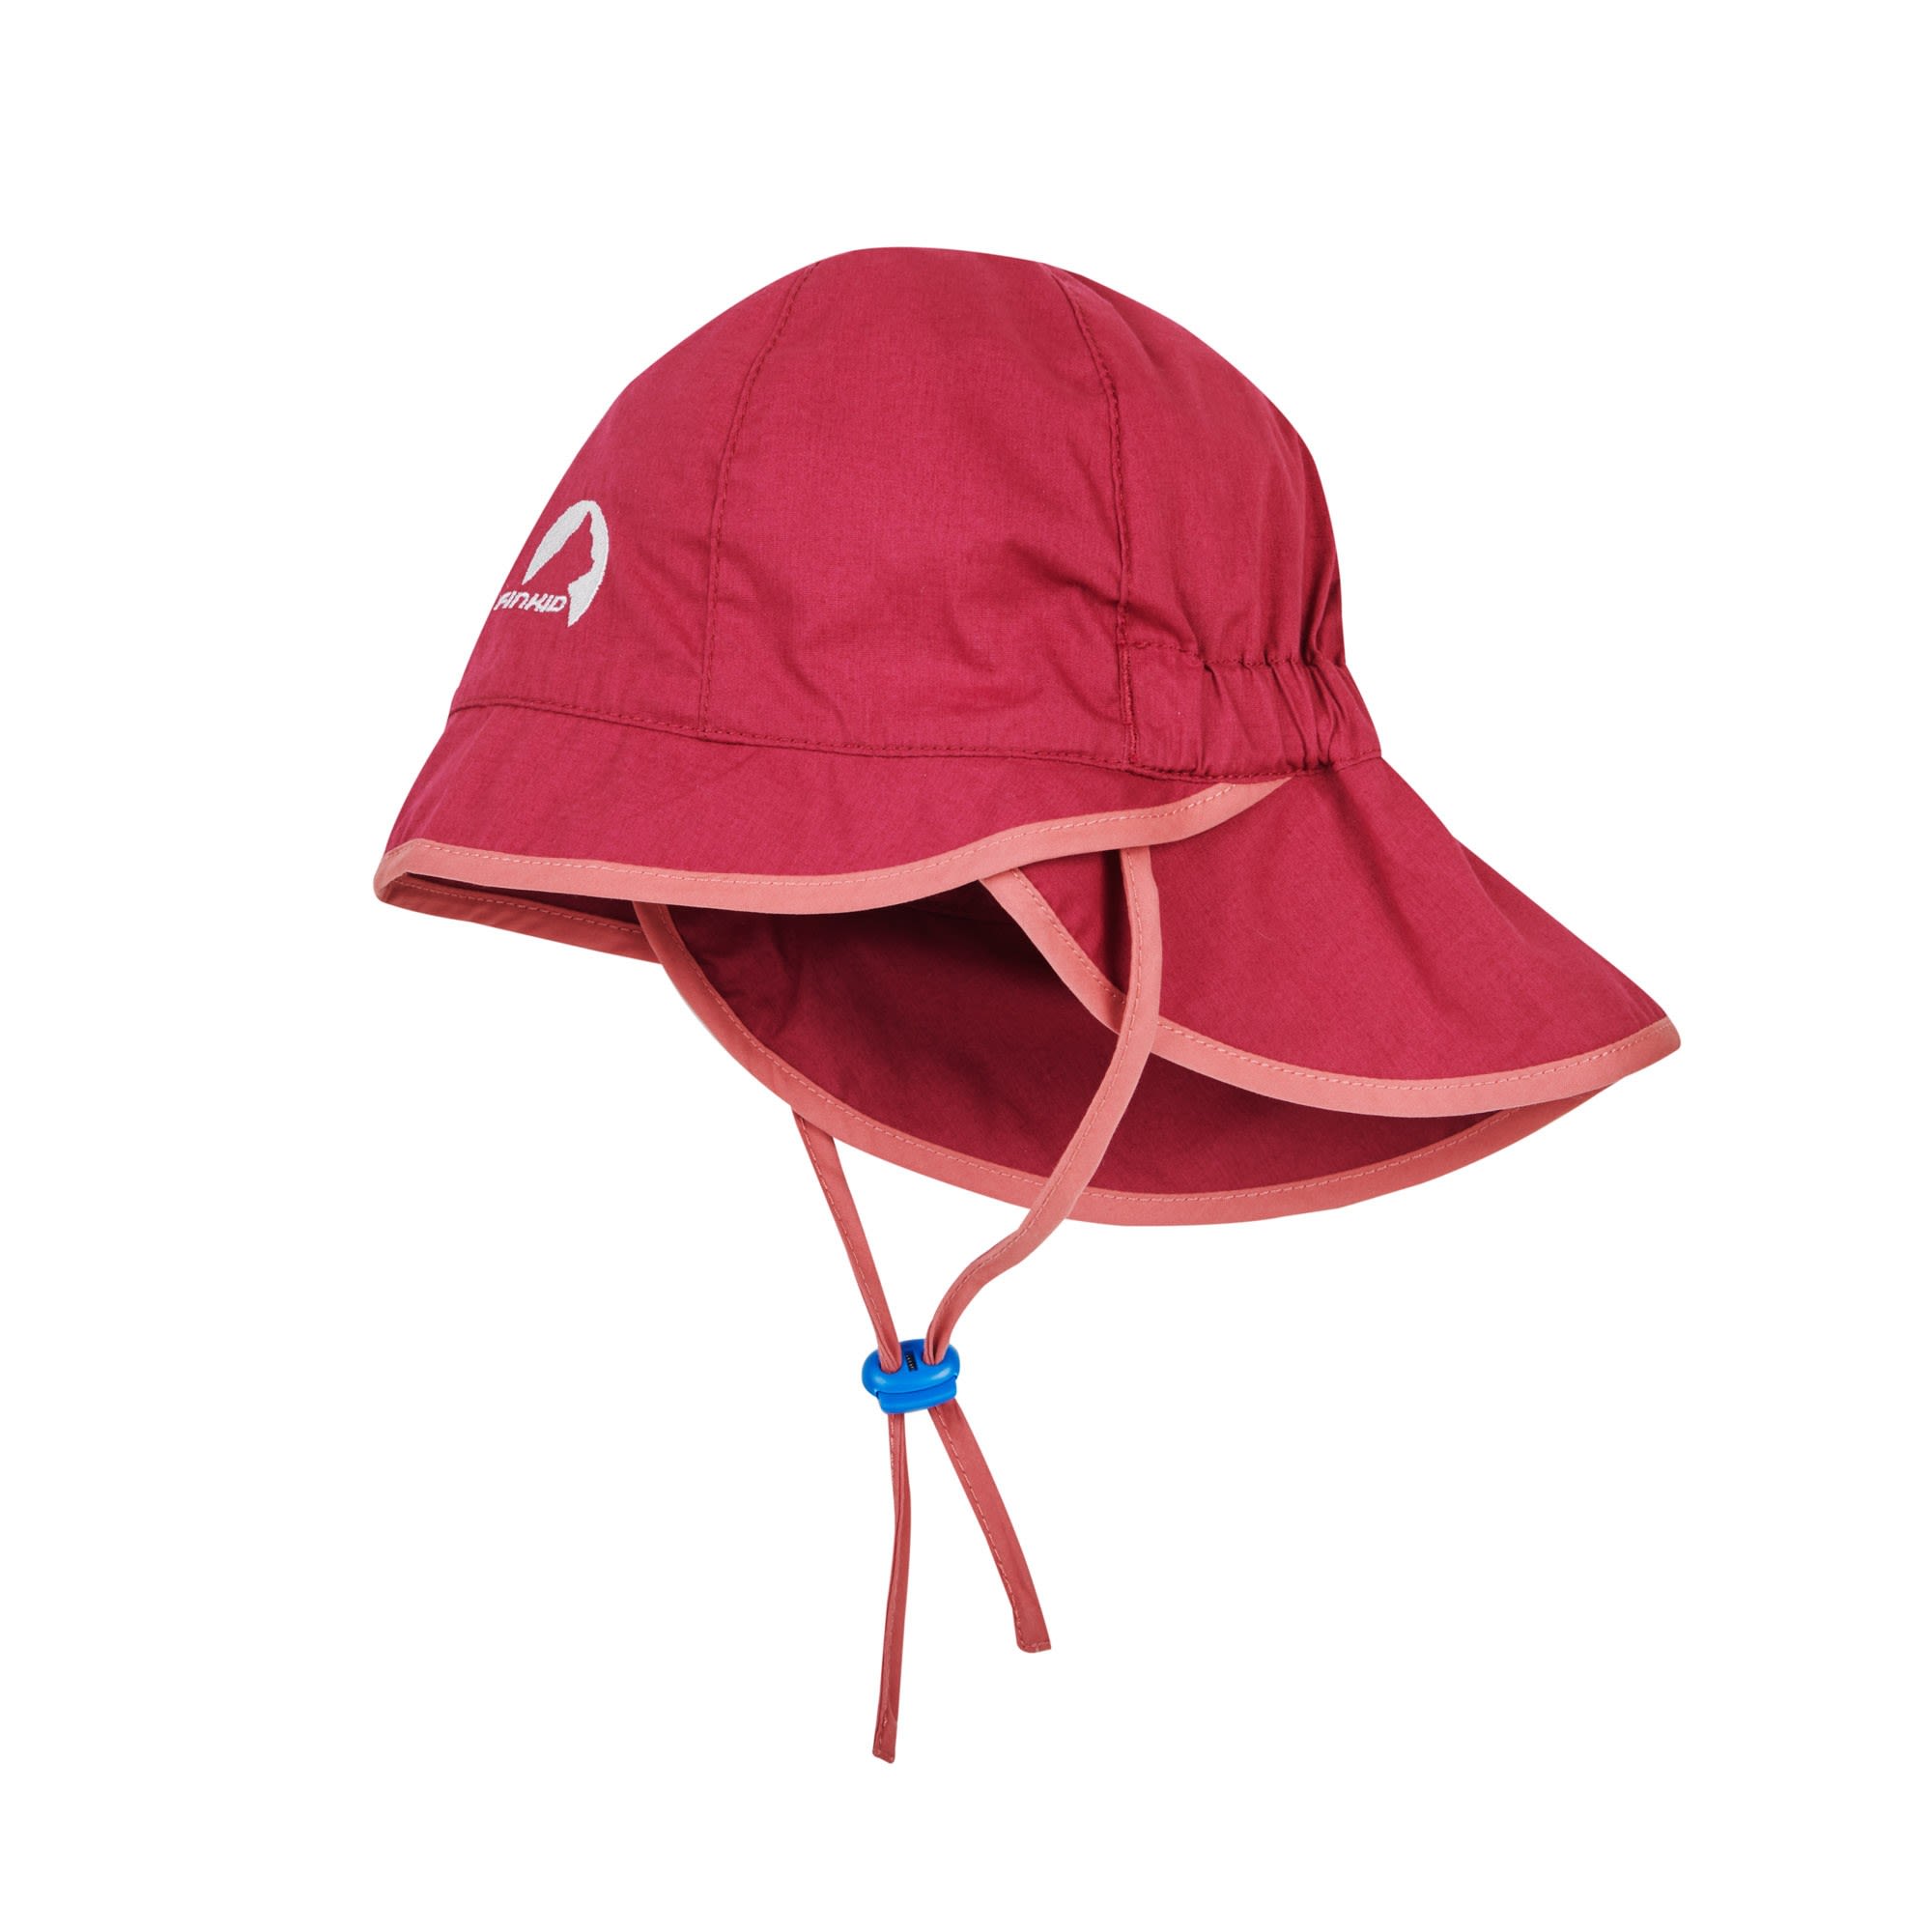 Finkid Helle Rot- Caps und Hte- Grsse XS - Farbe Beet Red - Rose